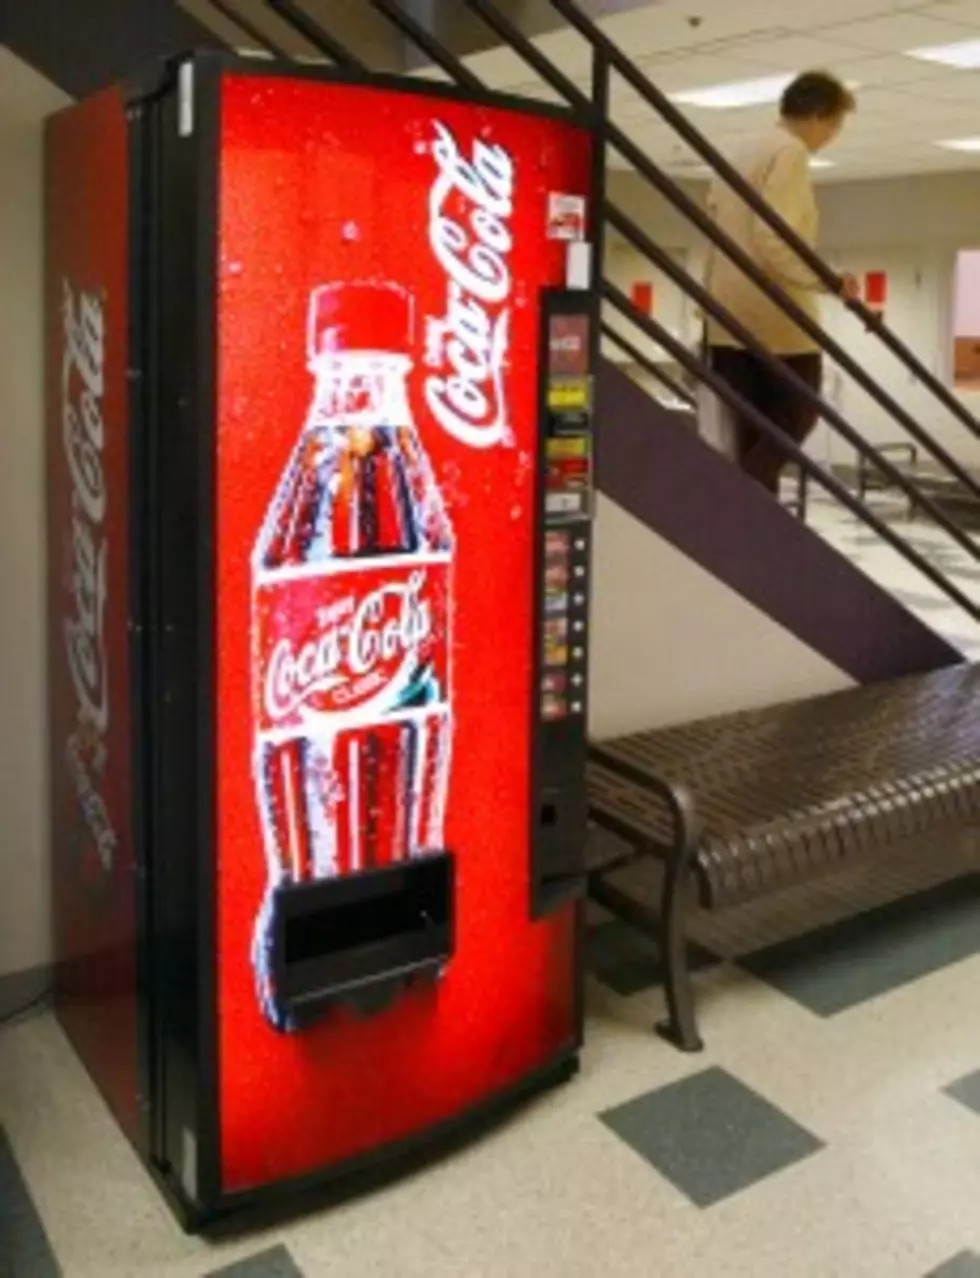 Police Arrest Man for Touching Himself by Pop Machine